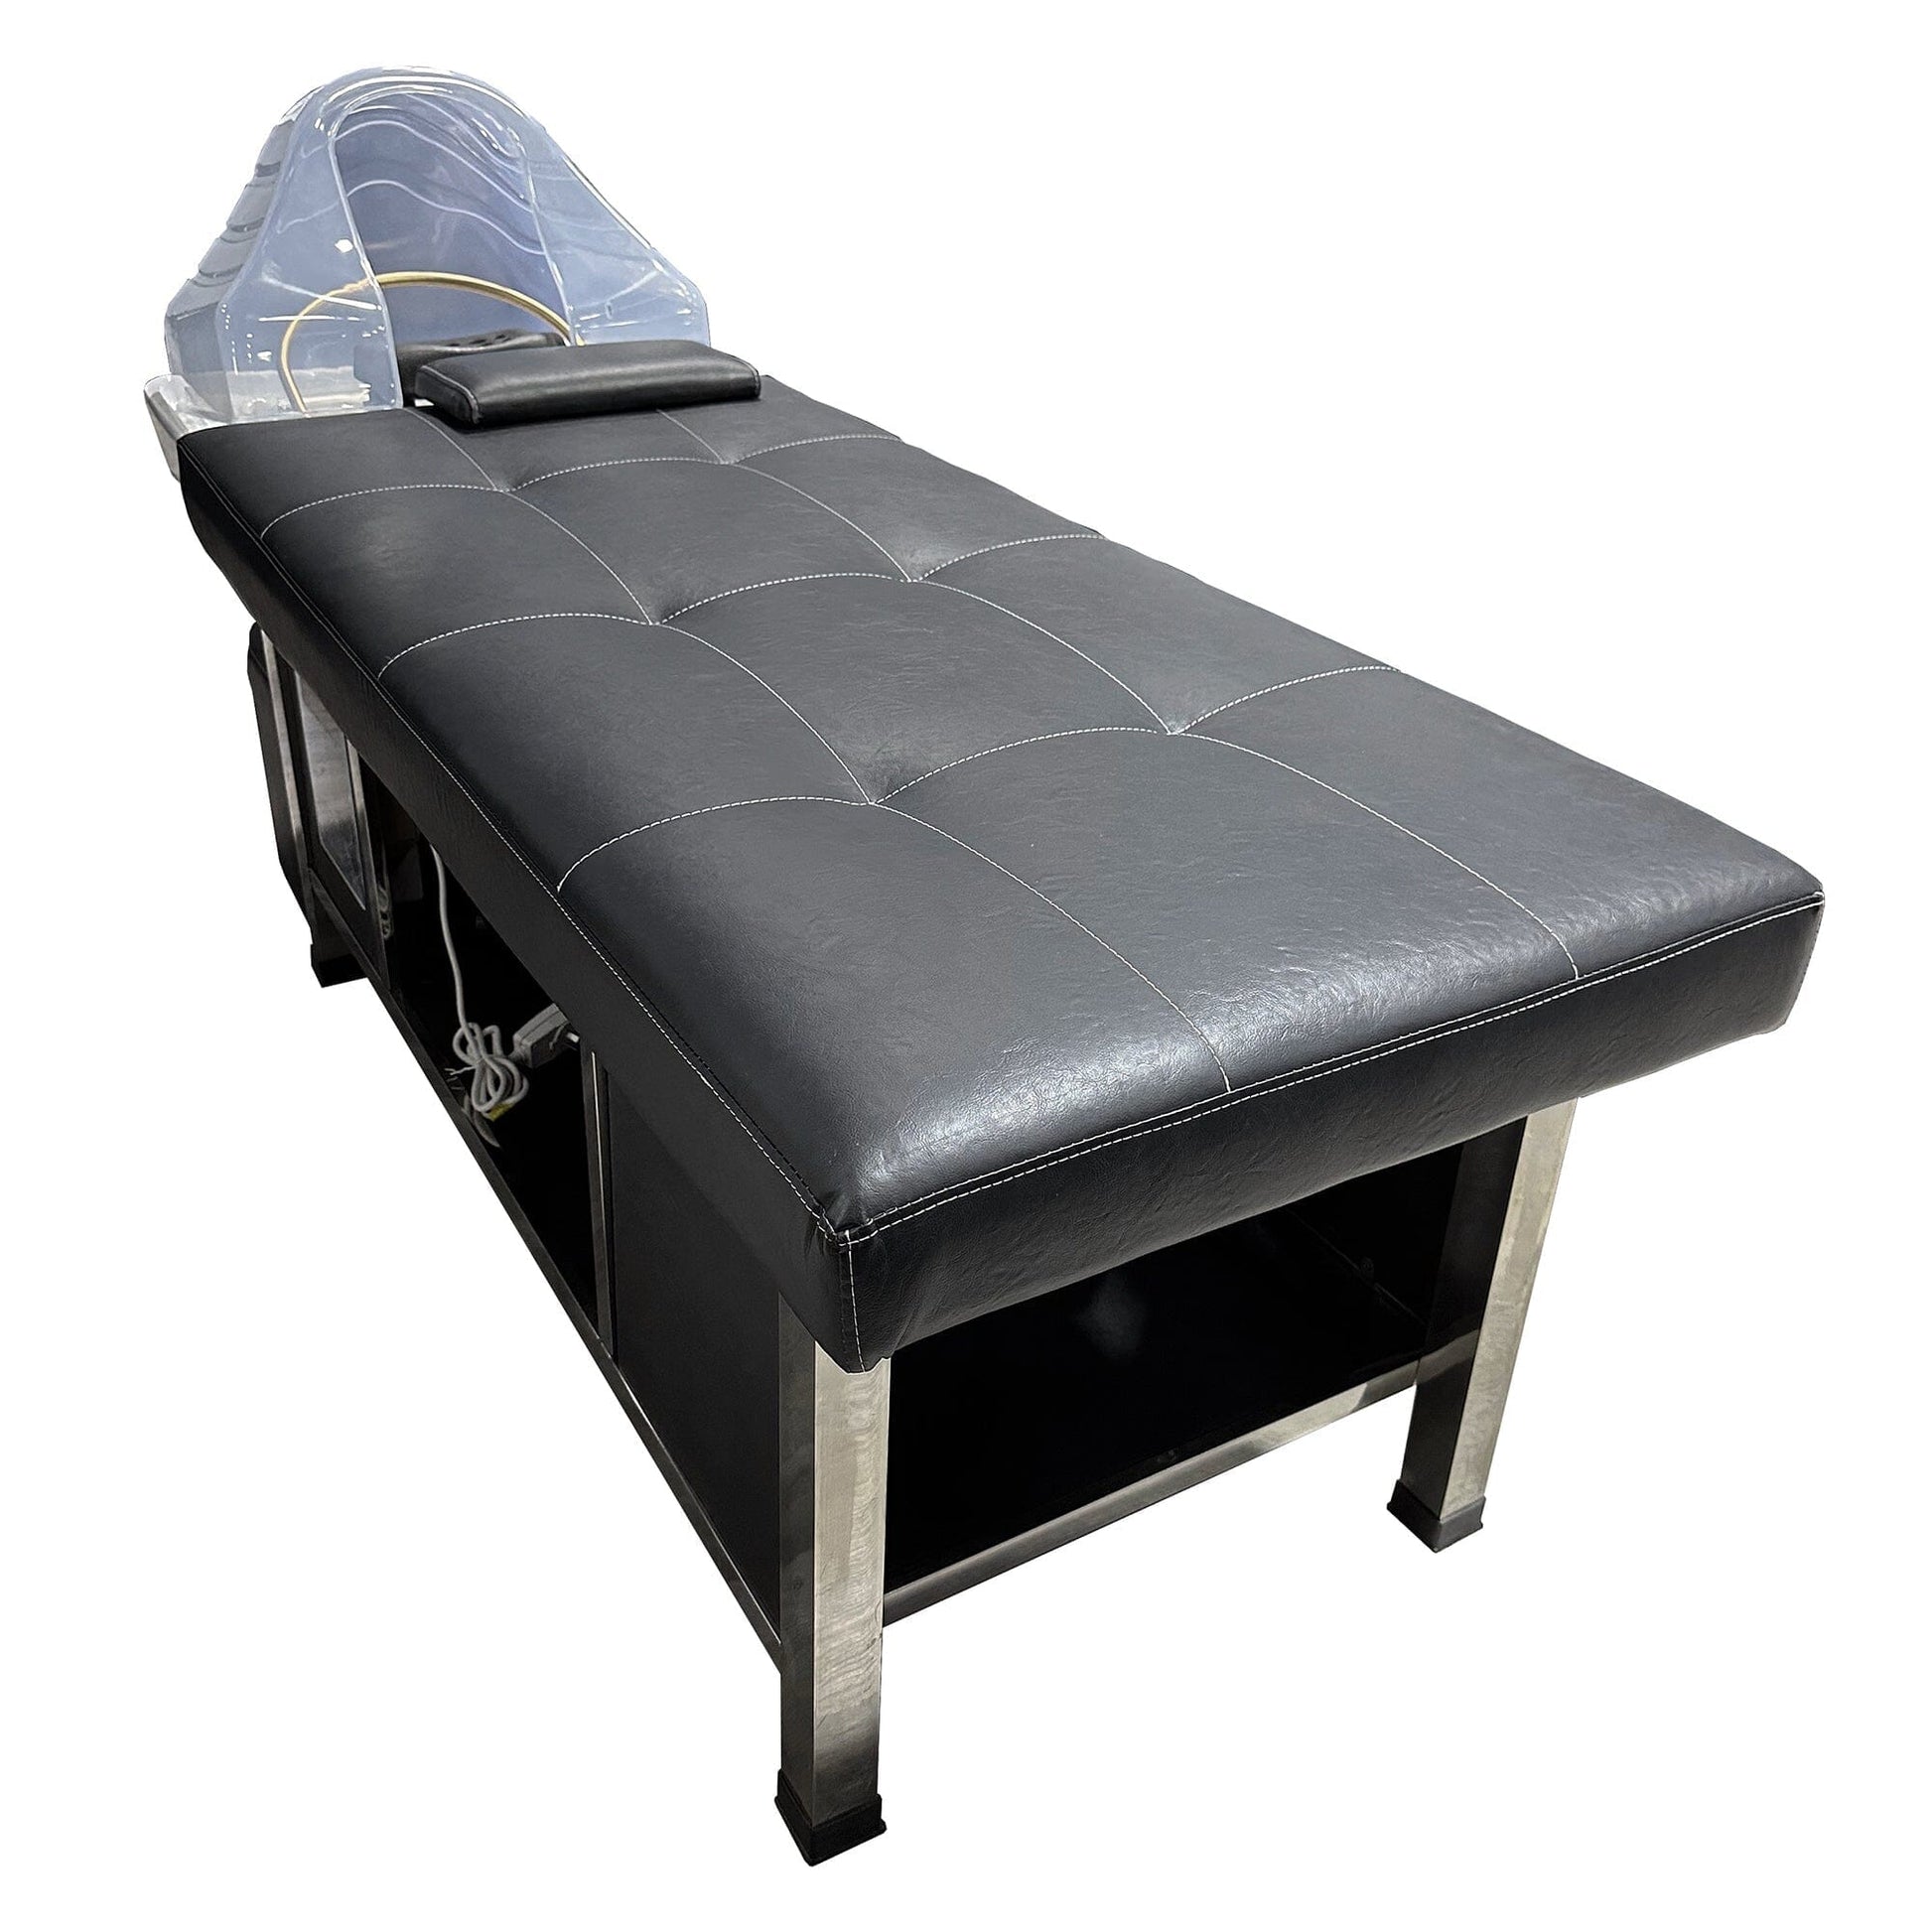 Shampoo Bed | 611-1NM | Thai Style Shampoo Bed with Integrated Water Circulation and Fumigation for Beauty Massage SHAMPOO UNITS AND CABINETS SSW 